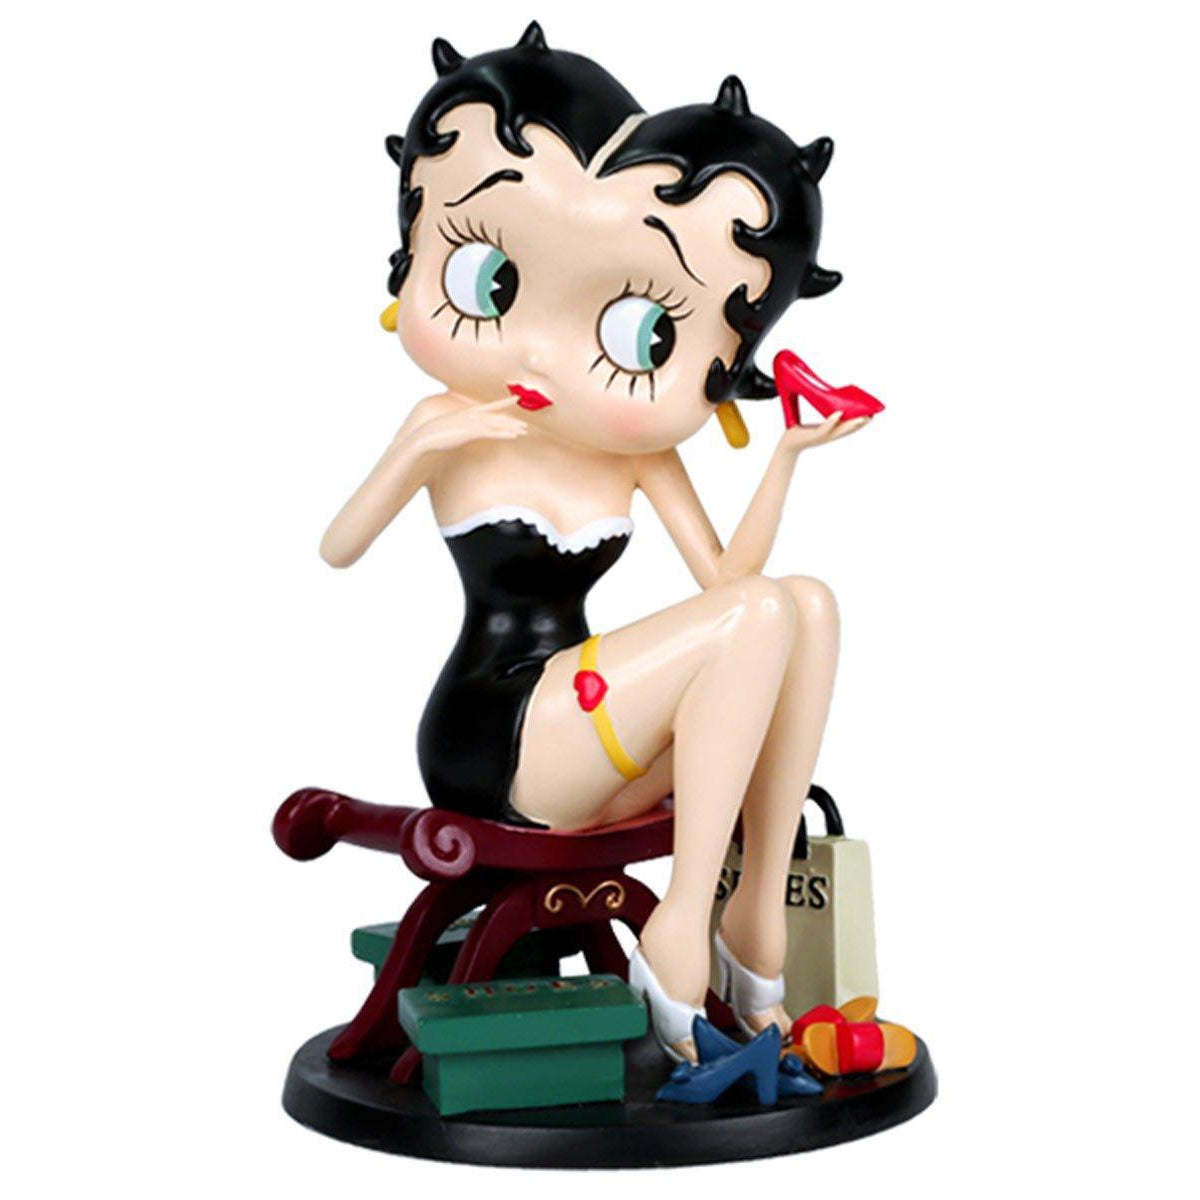 Betty Boop Fitting Shoes (Betty Boop) - Gallery Gifts Online 